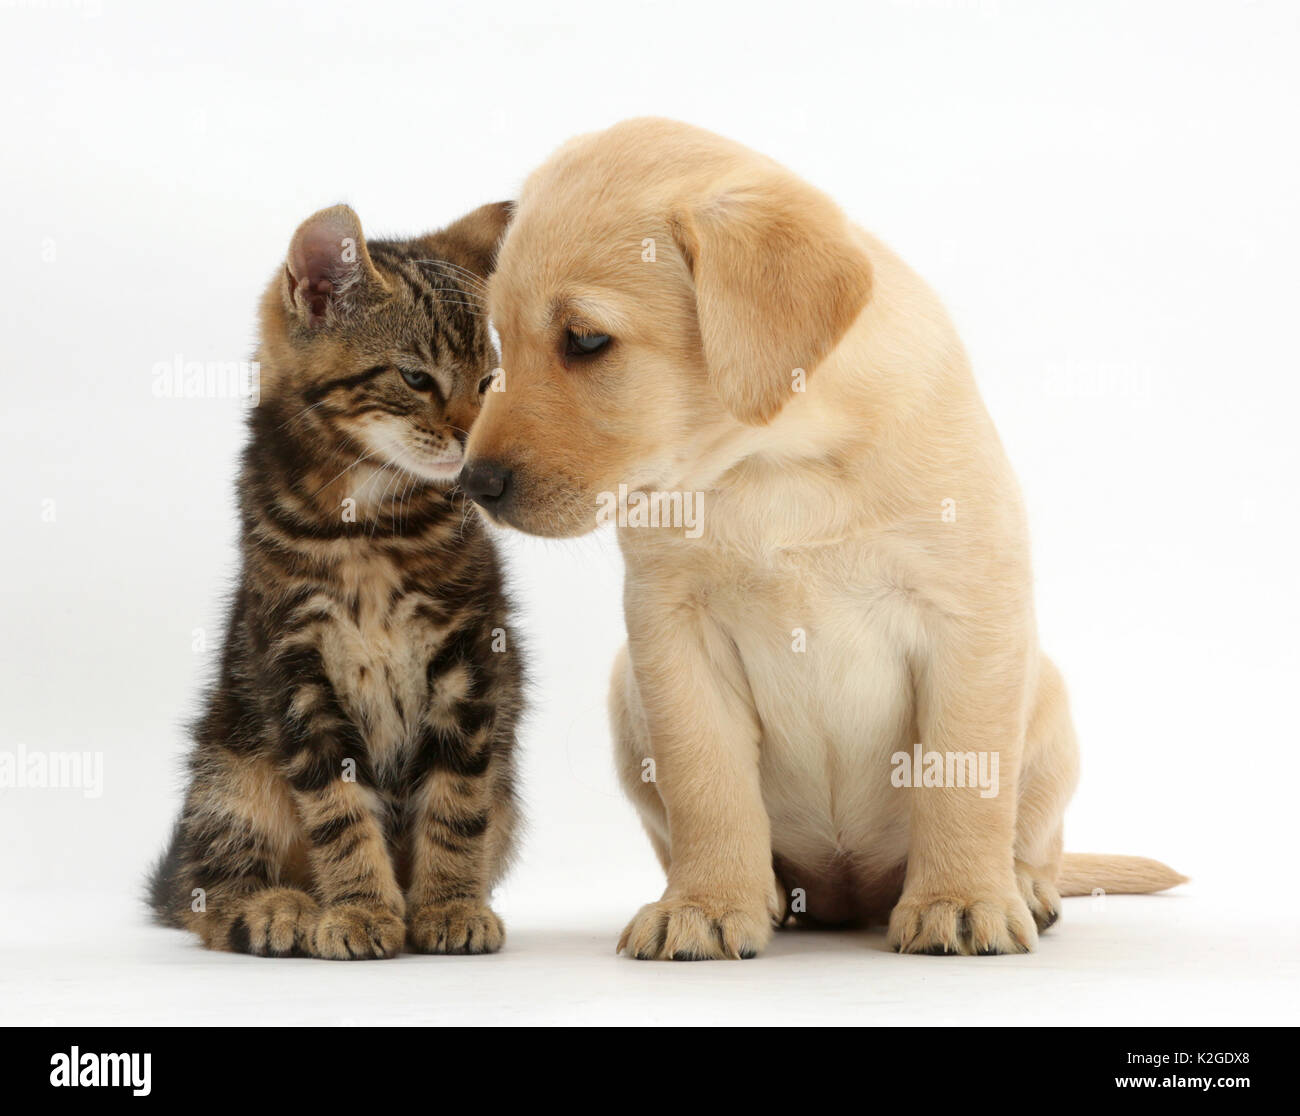 Tabby kitten, Picasso, 9 weeks, head to head with Yellow labrador puppy, 8 weeks. Stock Photo